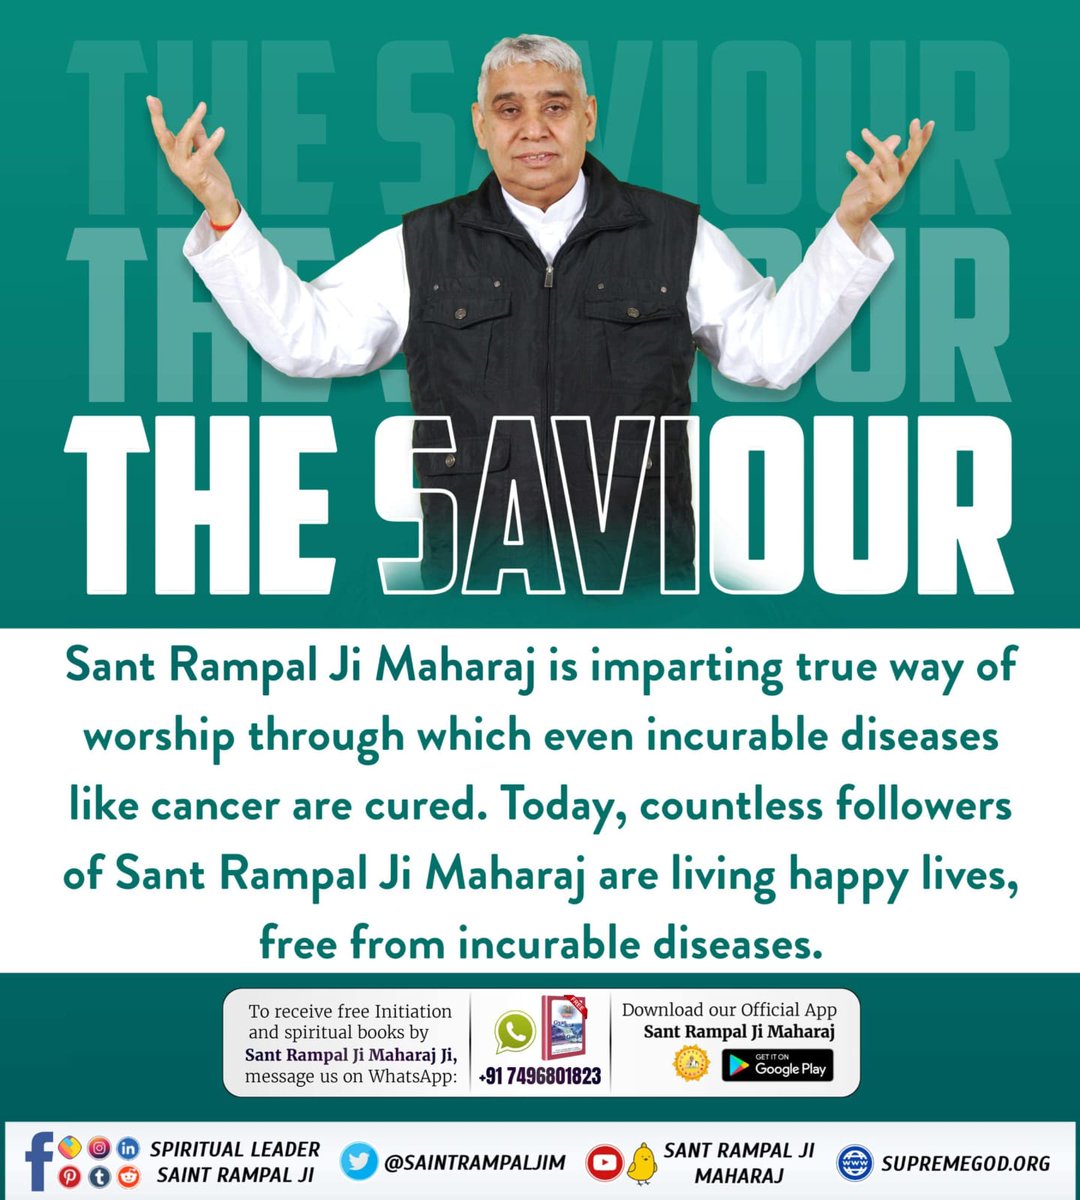 Today, lakhs of people have become drug free and disease free due to the true devotion shown by the savior of the world, Saint Rampal Ji Maharaj. #जगत_उद्धारक_संत_रामपालजी - Saviour Of The World